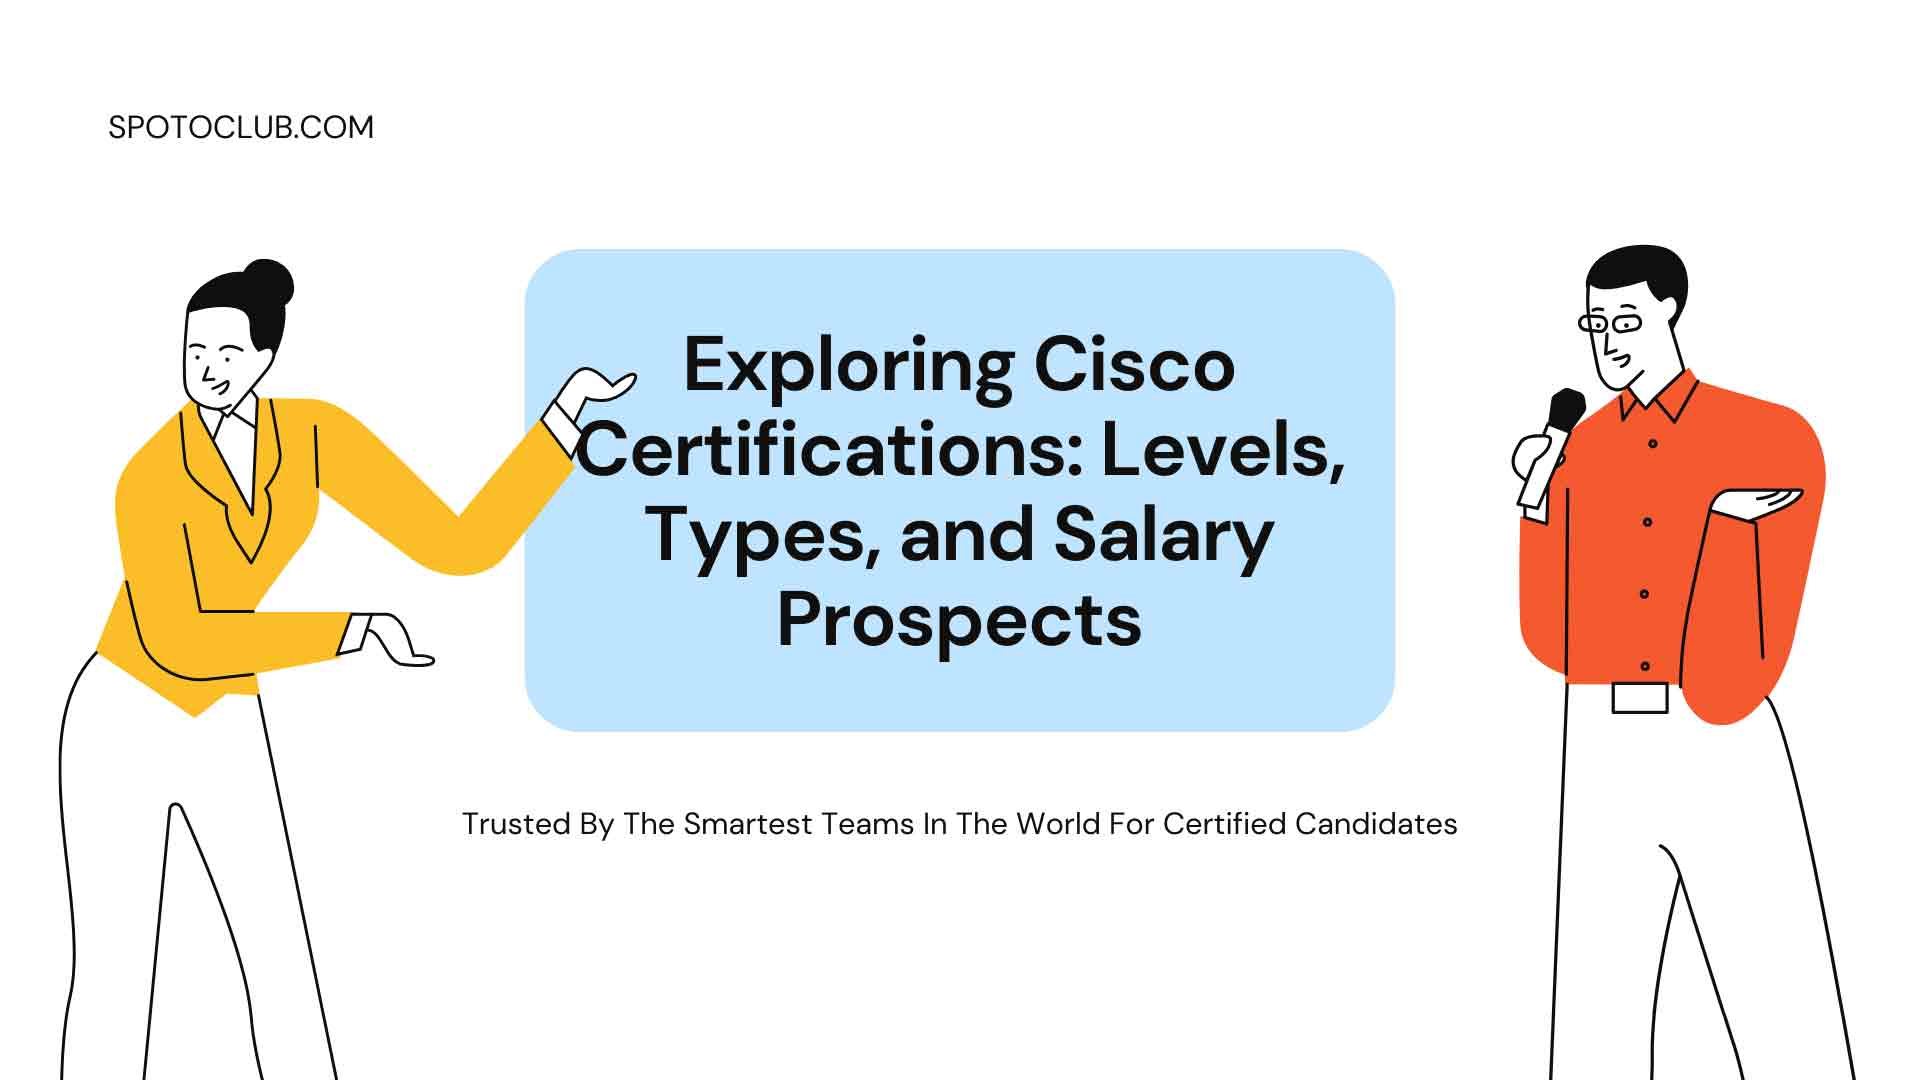 Exploring Cisco Certifications: Levels, Types, and Salary Prospects